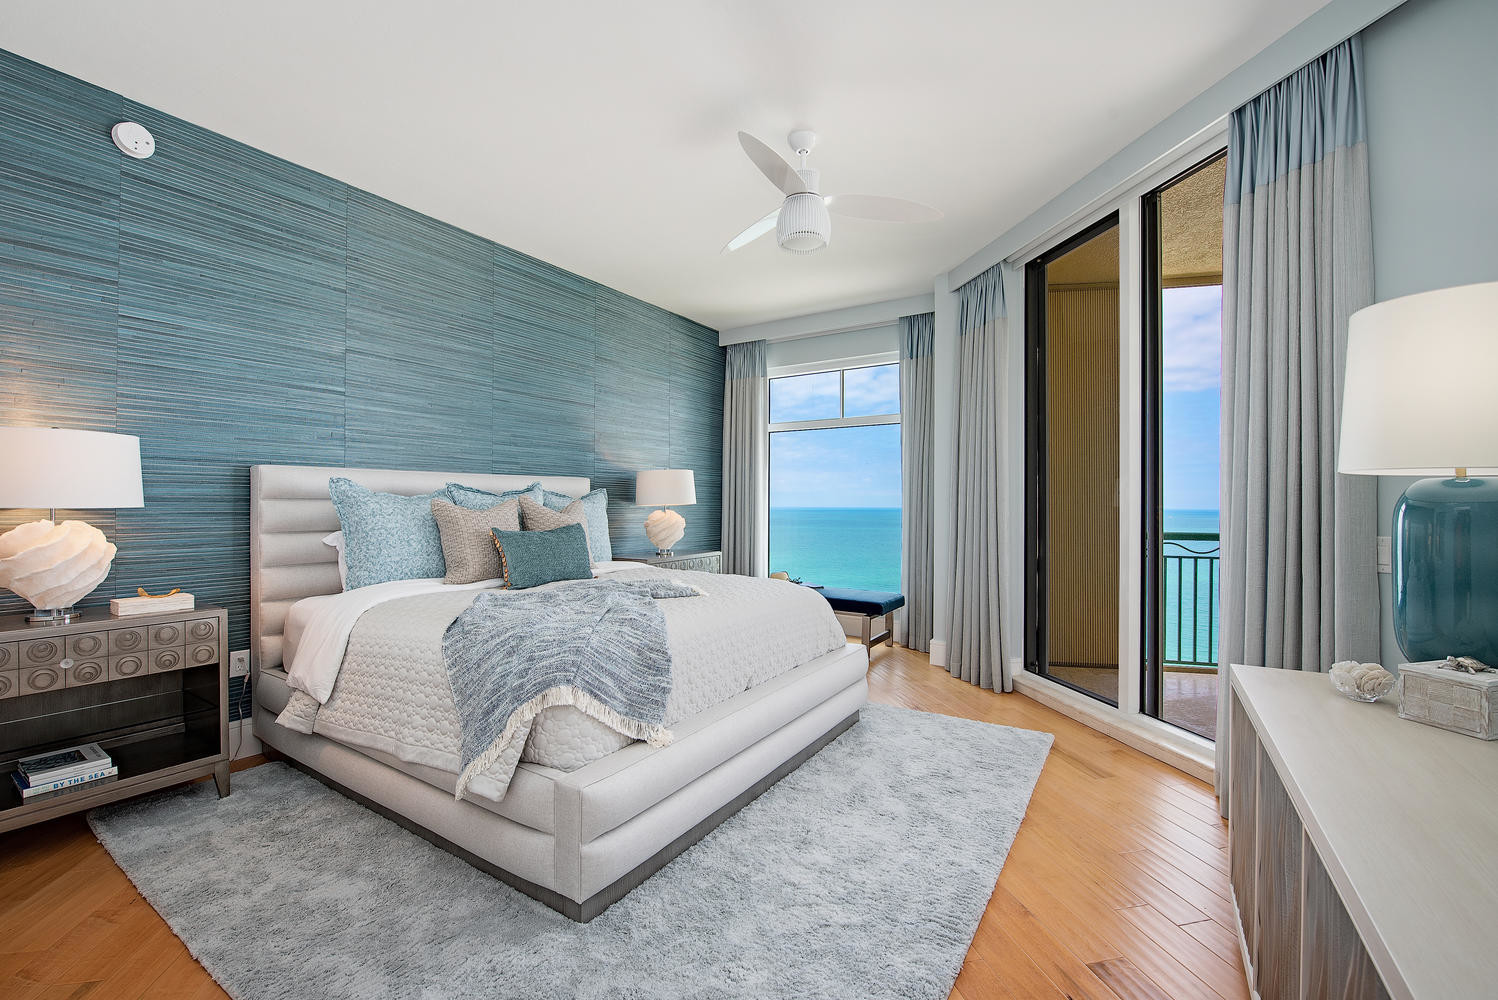 A Beach Style Guest Bedroom With The Cerulean Teal And Gray Wall 